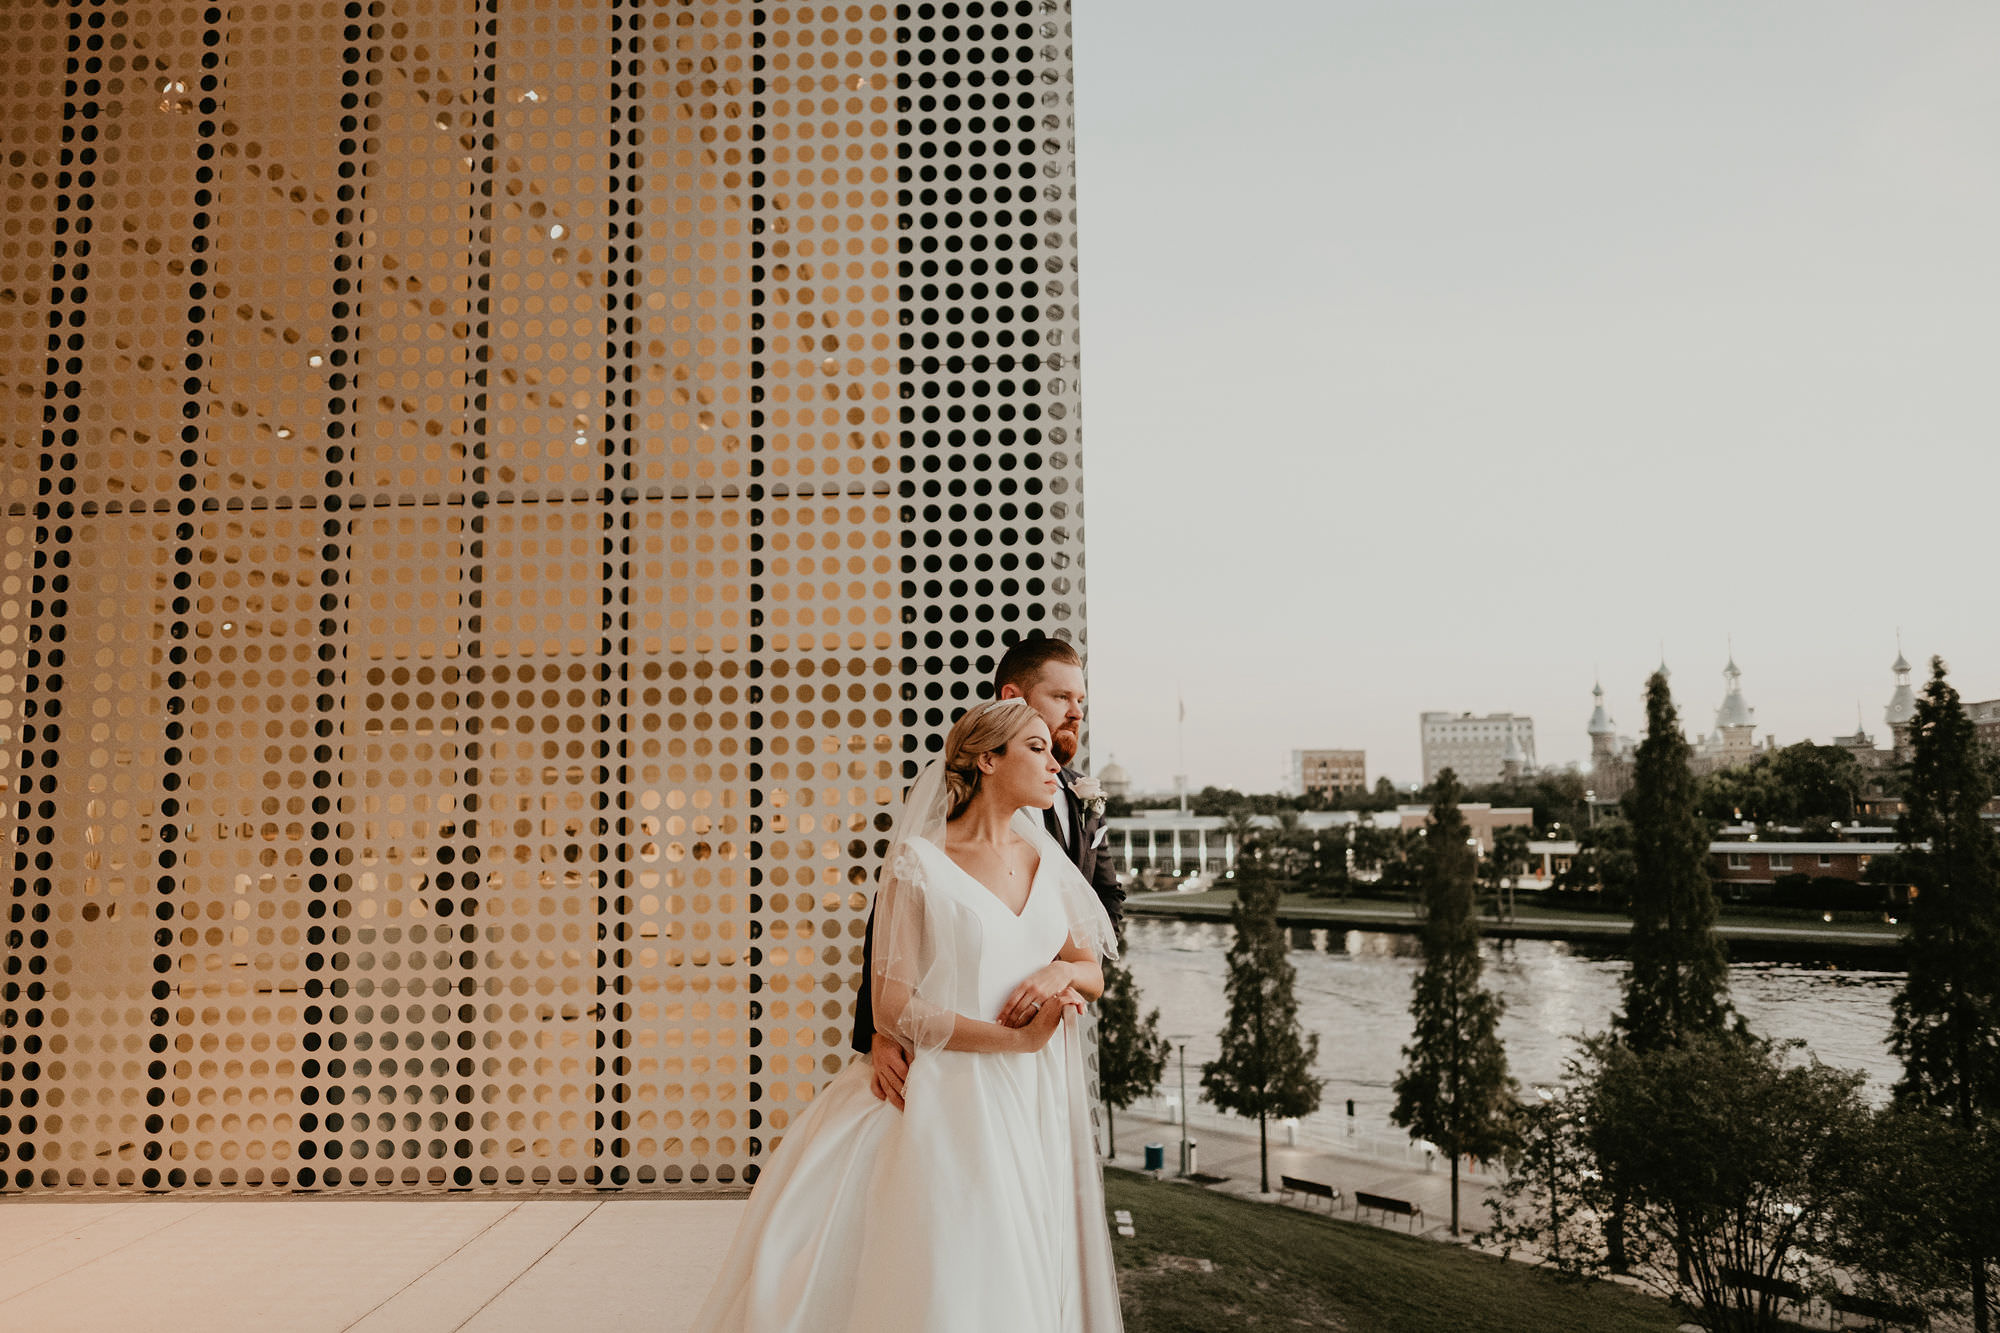 Outdoor Downtown Tampa Waterfront Bride and Groom Portrait at Tampa Museum of Art | V Neck Mikado Satin Ballgown Wedding Dress by Anomalie | Groom Wearing Classic Black Suit Tux